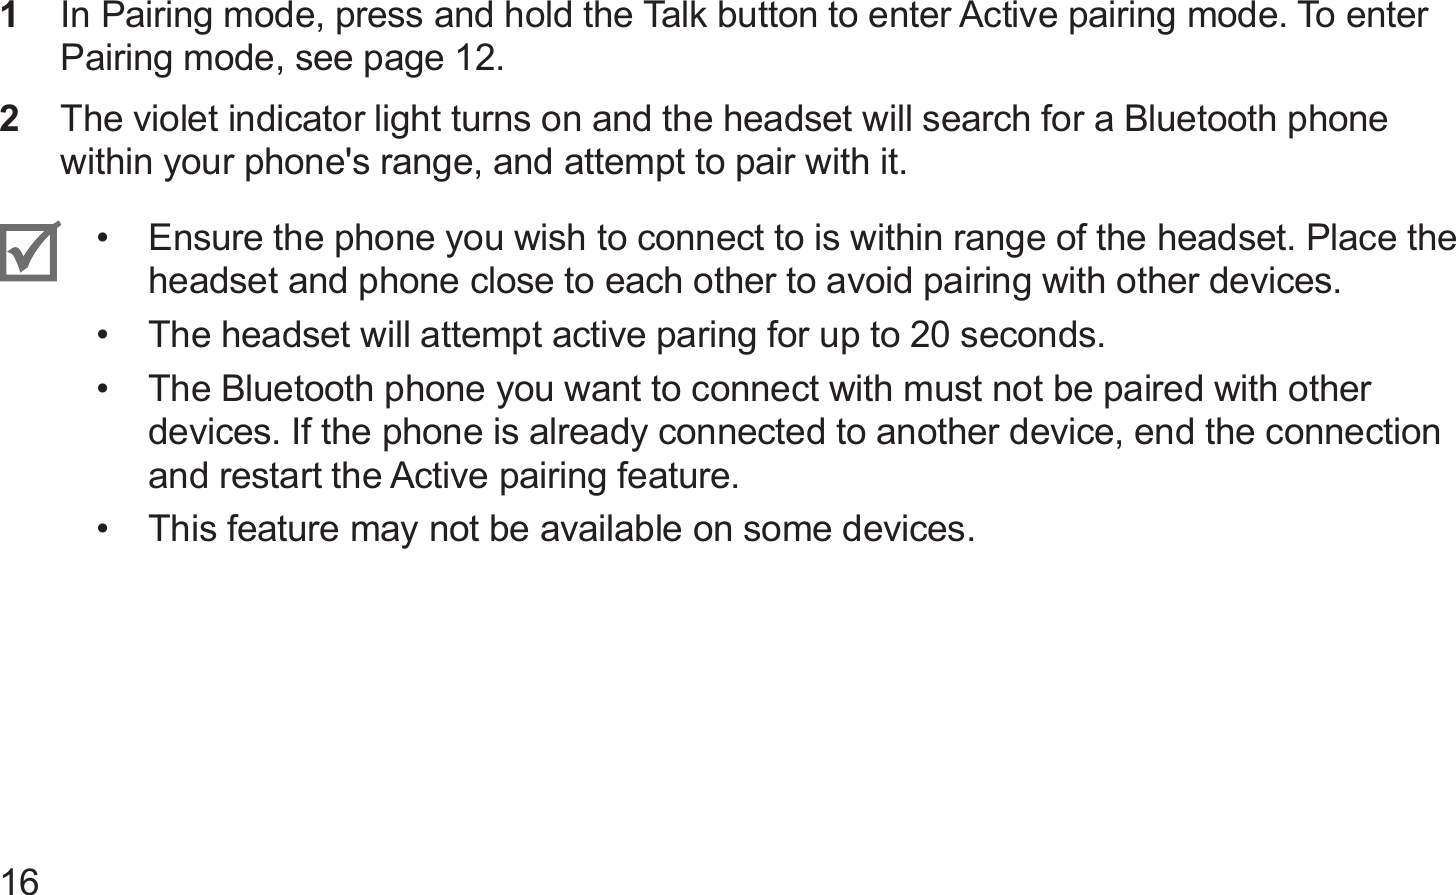 16In Pairing mode, press and hold the Talk button to enter Active pairing mode. To enter 1 Pairing mode, see page 12.The violet indicator light turns on and the headset will search for a Bluetooth phone 2 within your phone&apos;s range, and attempt to pair with it.Ensure the phone you wish to connect to is within range of the headset. Place the • headset and phone close to each other to avoid pairing with other devices.The headset will attempt active paring for up to 20 seconds.• The Bluetooth phone you want to connect with must not be paired with other • devices. If the phone is already connected to another device, end the connection and restart the Active pairing feature.This feature may not be available on some devices.• 